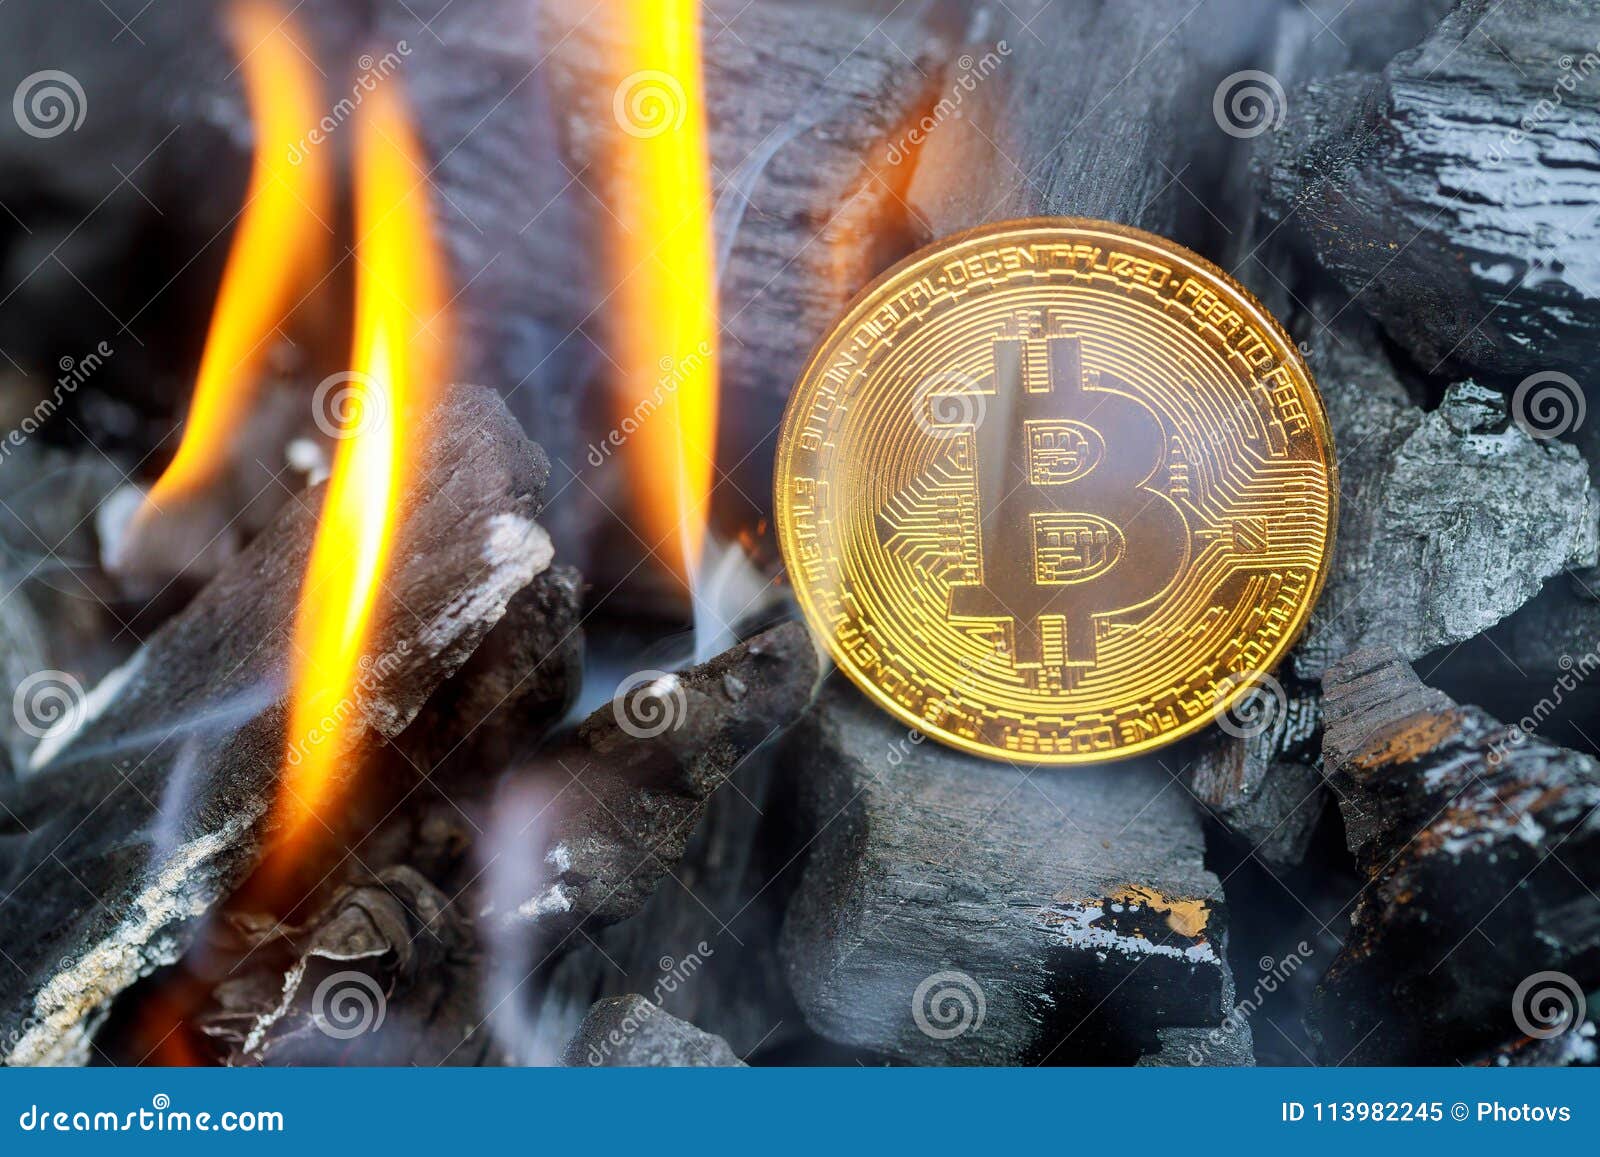 what does burning coins mean in crypto